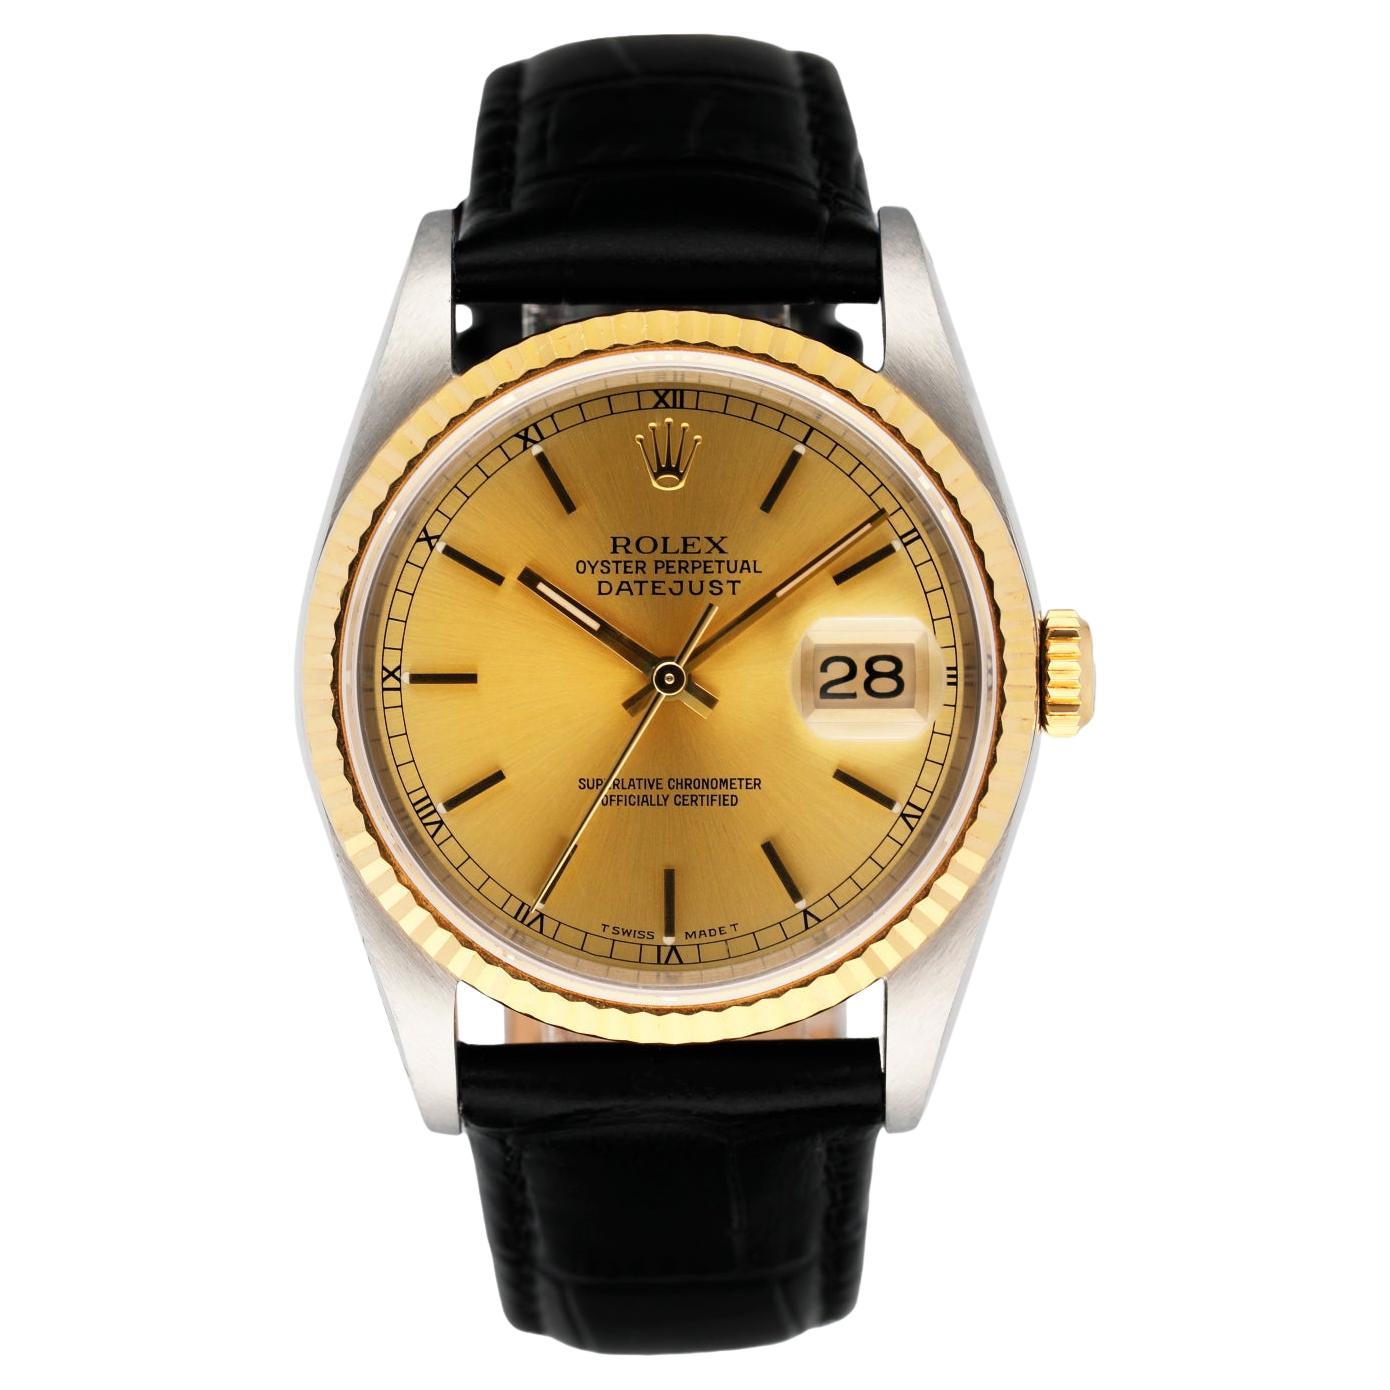 Rolex Datejust 16233 Champagne Dial Mens Watch